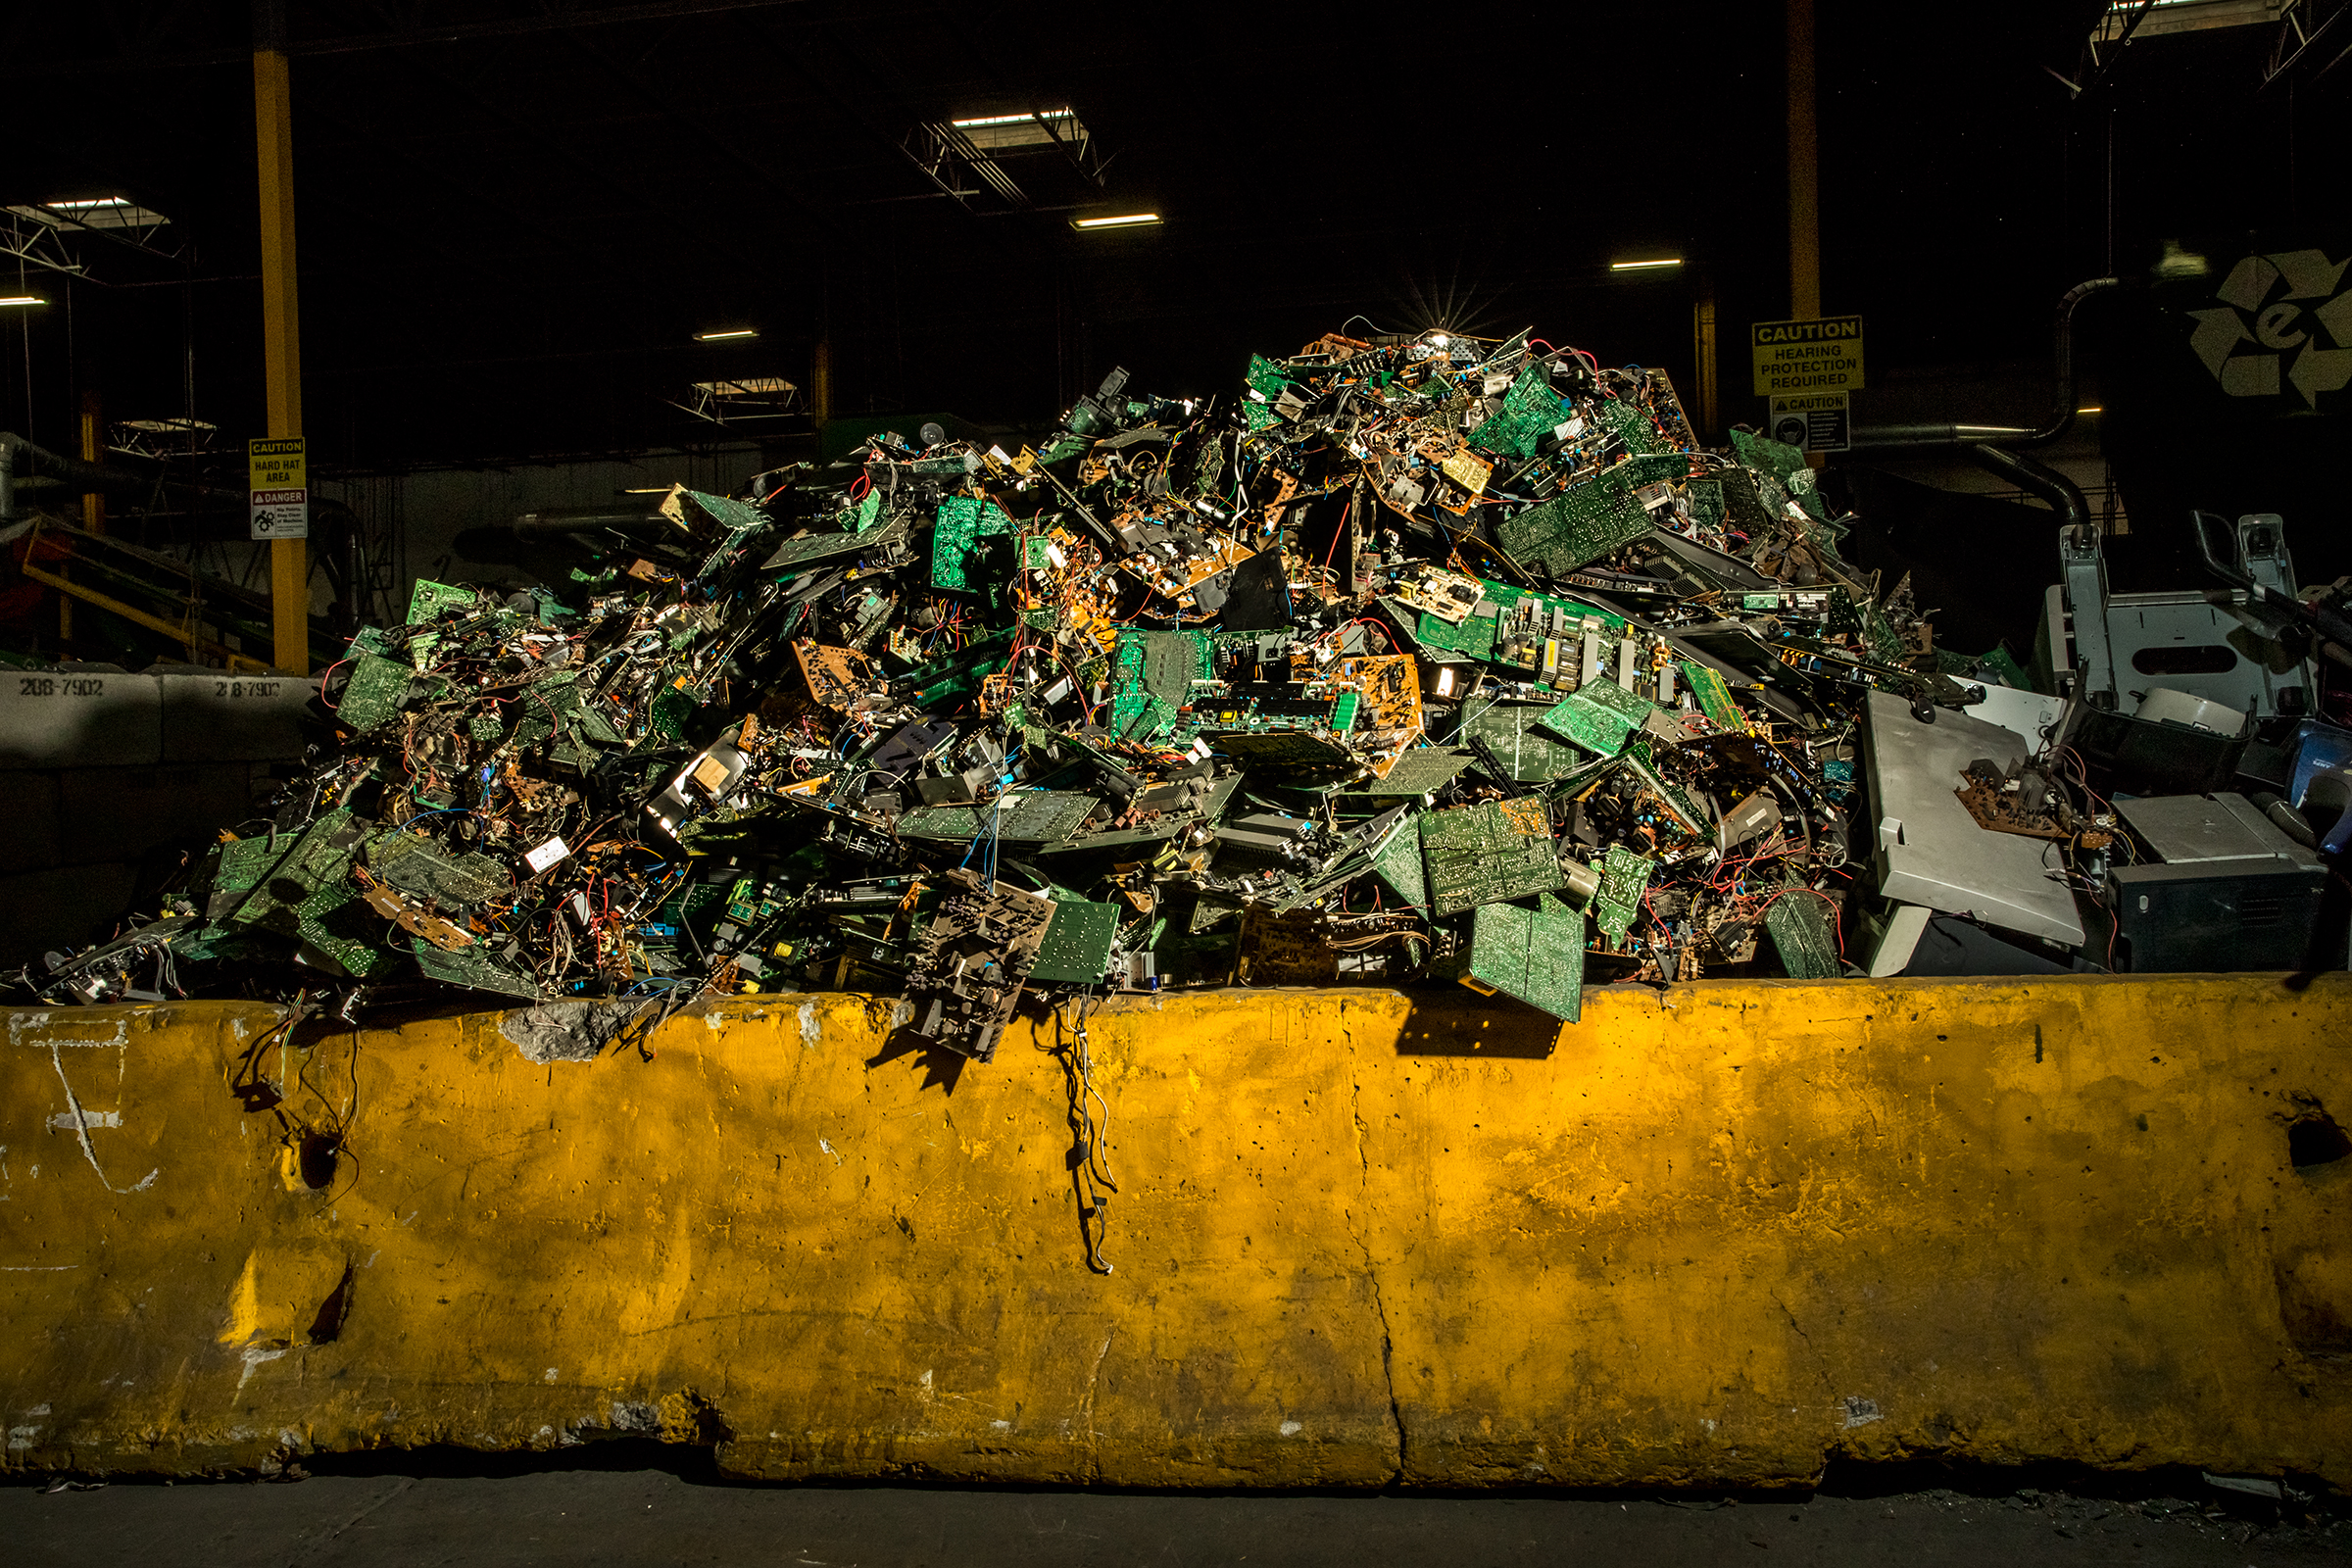 A heaping pile of circuit boards, which can be found in many modern electronics, at ERI's plant in Fresno in May. ERI separates them from their place of origin to be properly broken down and recycled. (Christie Hemm Klok for TIME)